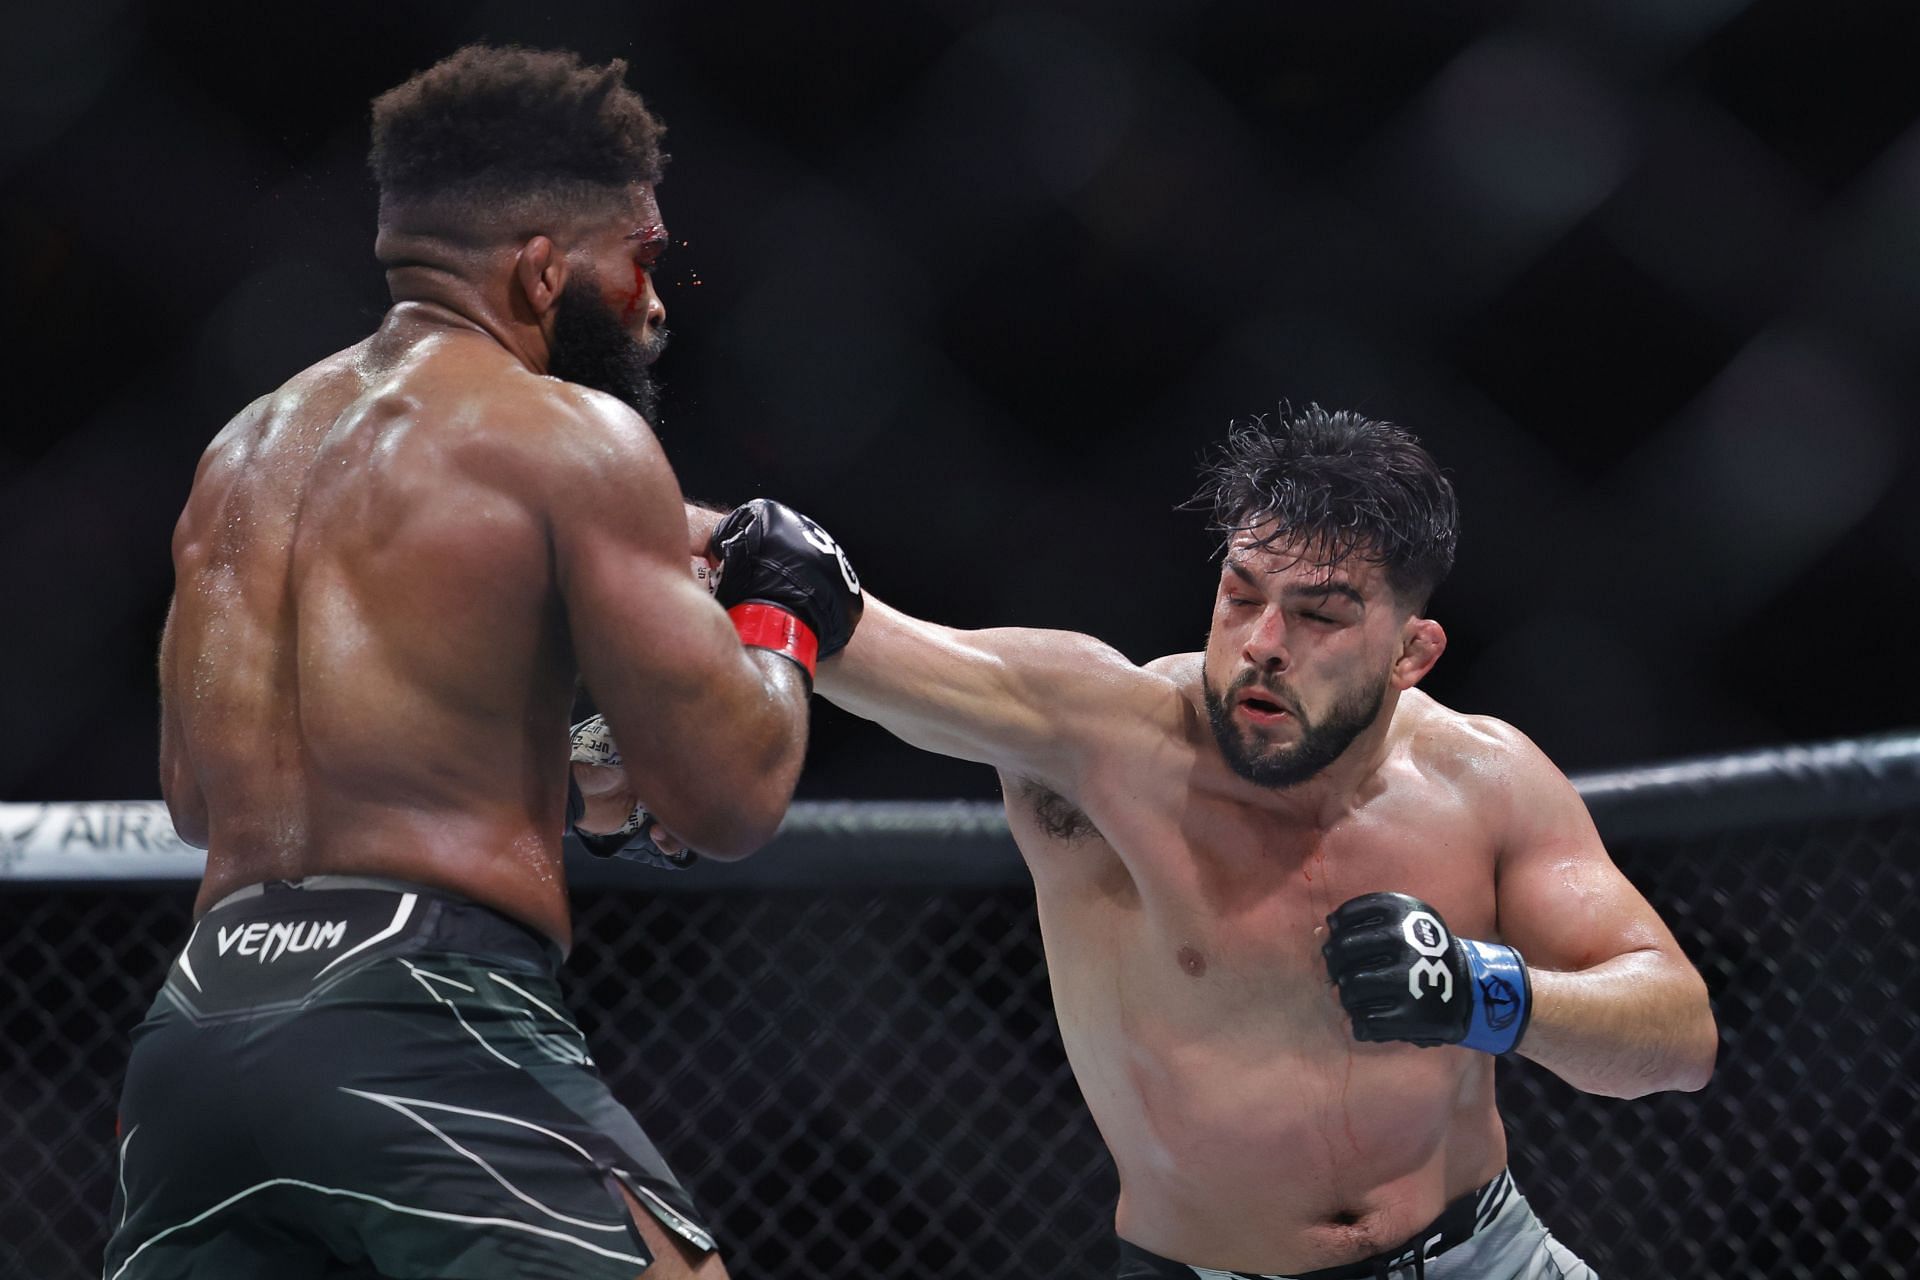 Kelvin Gastelum picked up his first win in some time by defeating Chris Curtis